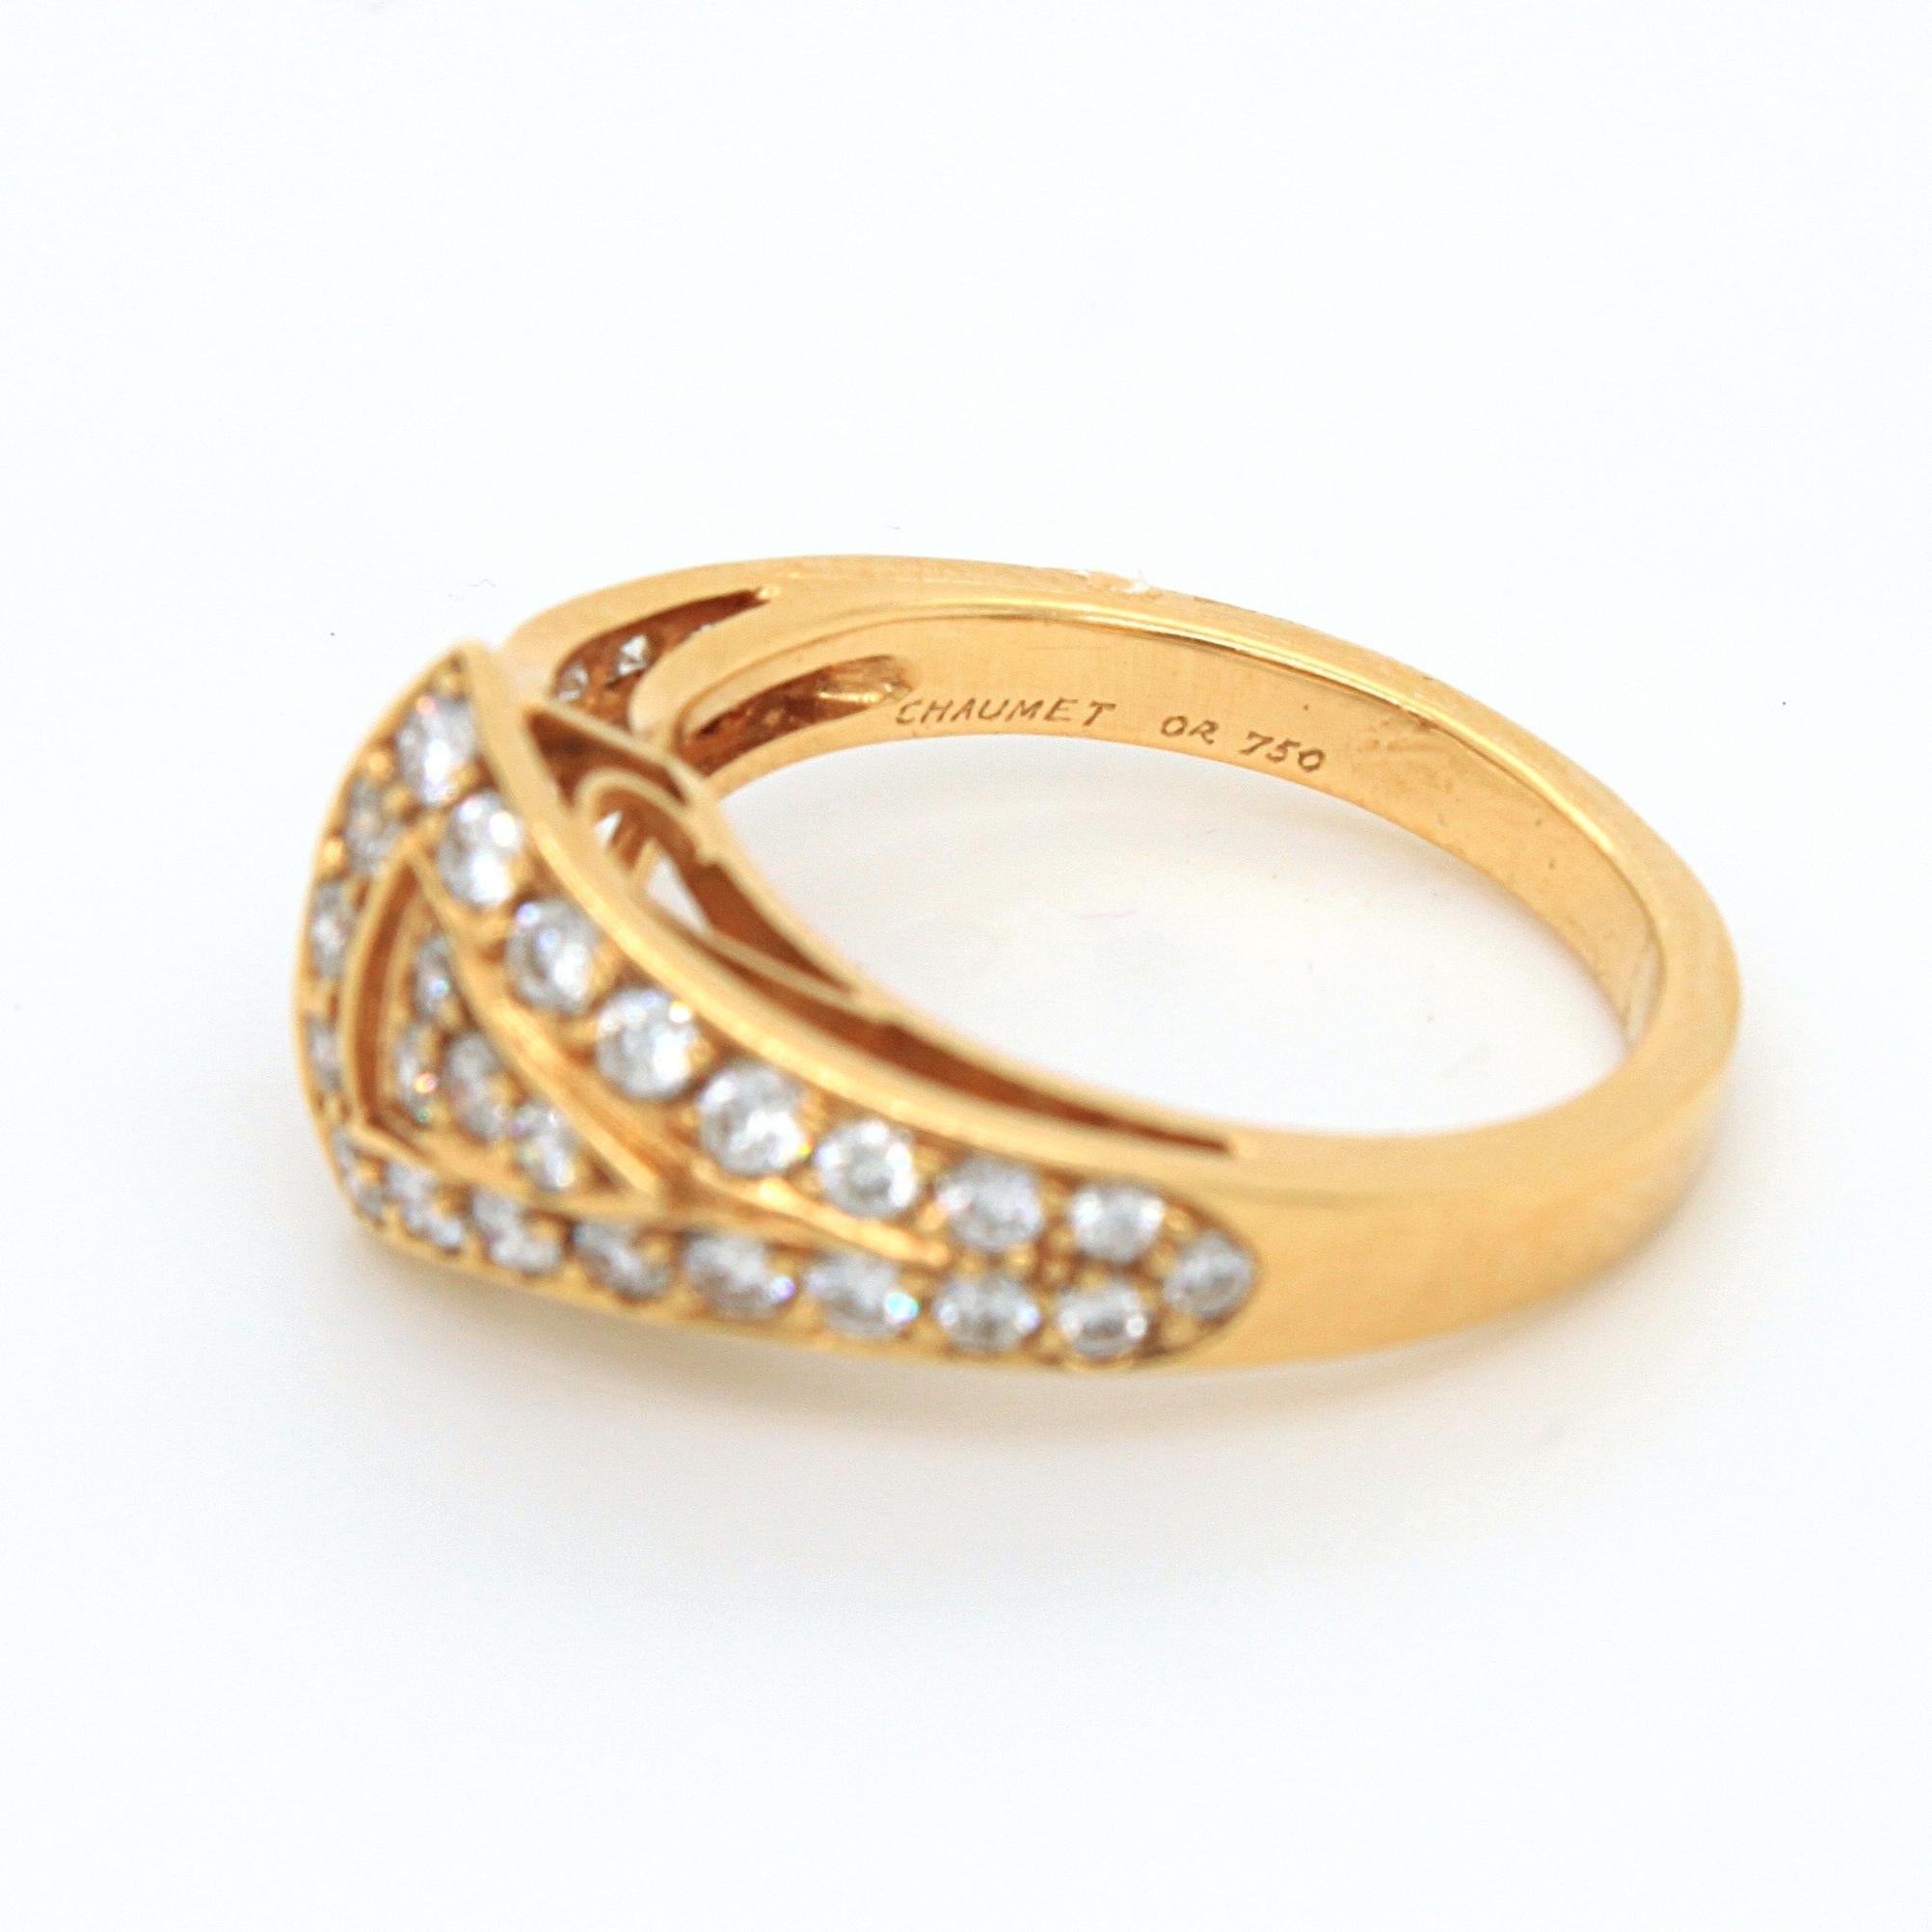 Geometric Diamond Ring in 18k Yellow Gold, by Chaumet, 20th Century 5